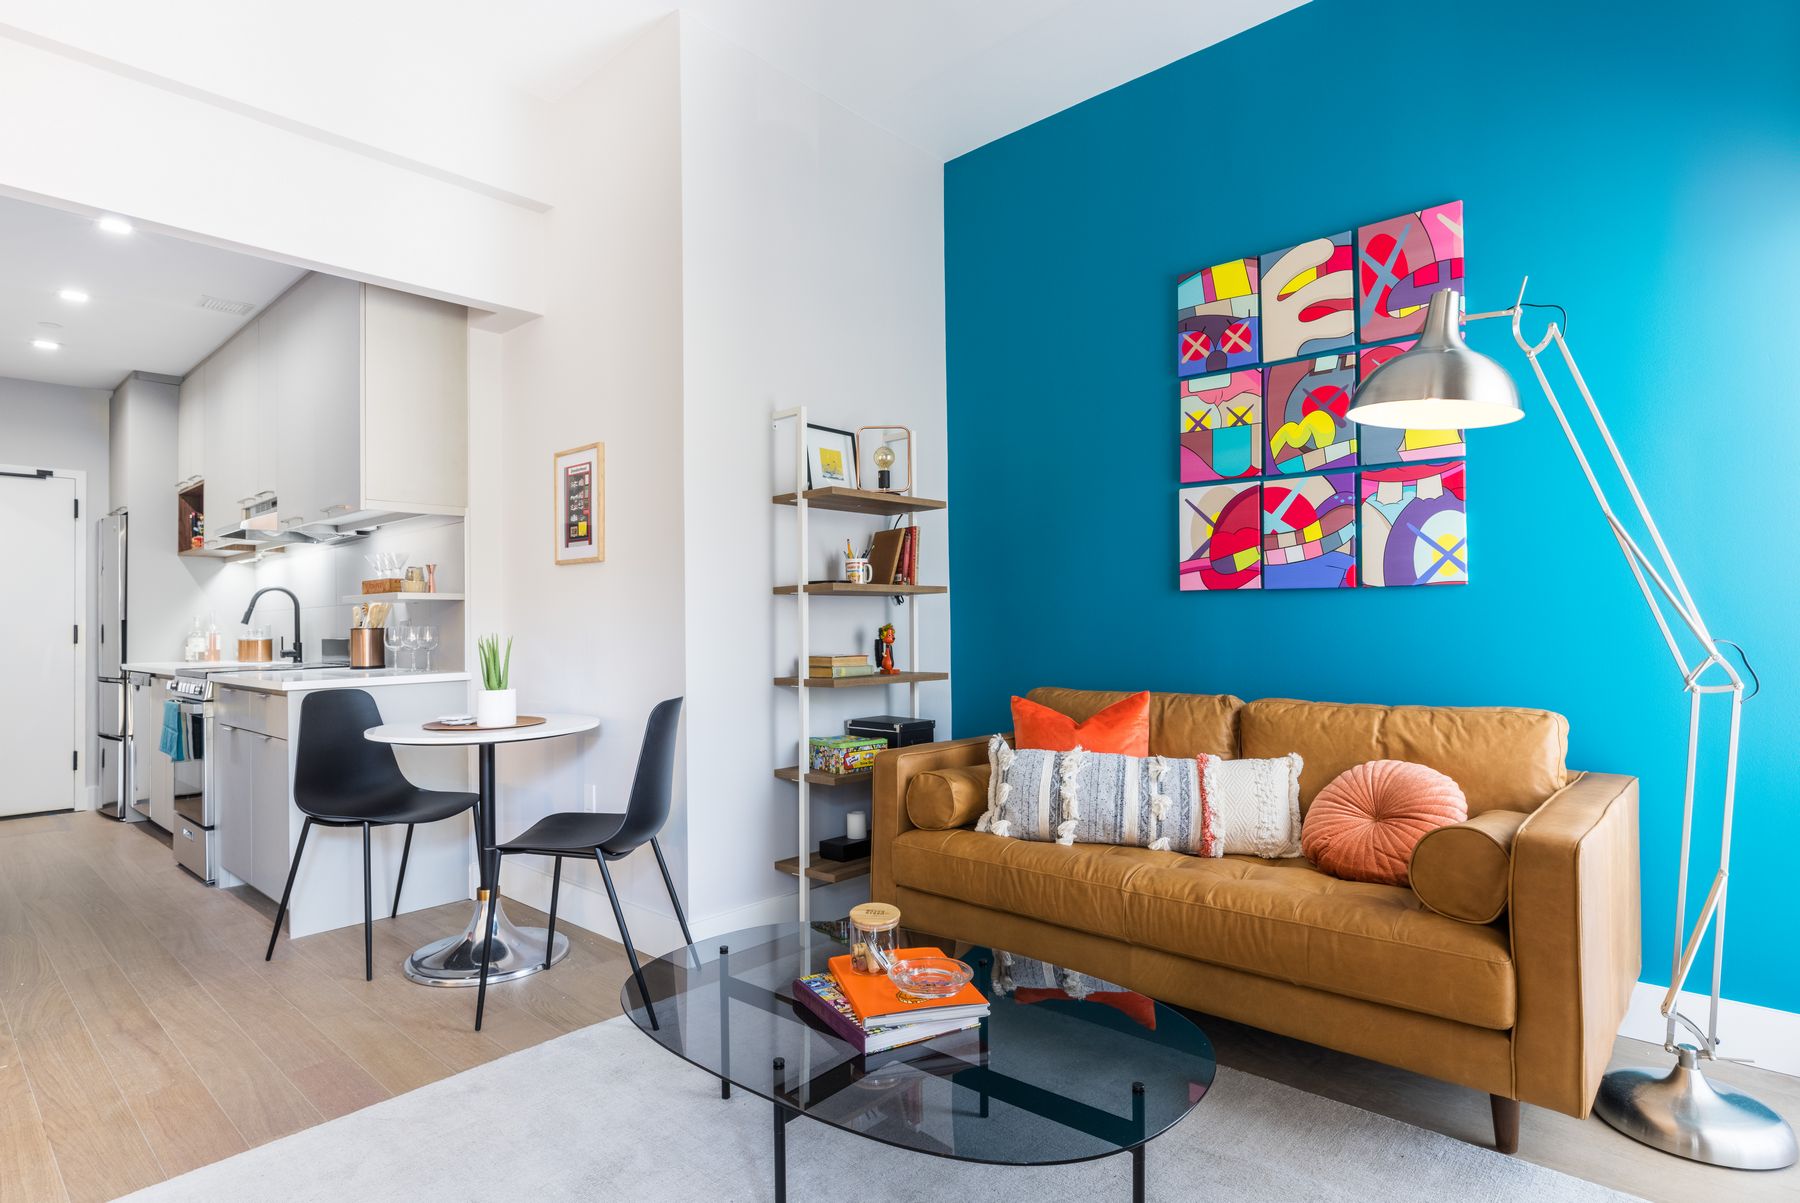 Bright modern open floorplan, camel couch with funky pillows, glass coffee table with books, bookshelf on side, teal accent wall with grid pop part, table for two seating leading to open white kitchen, wood flooring throughout